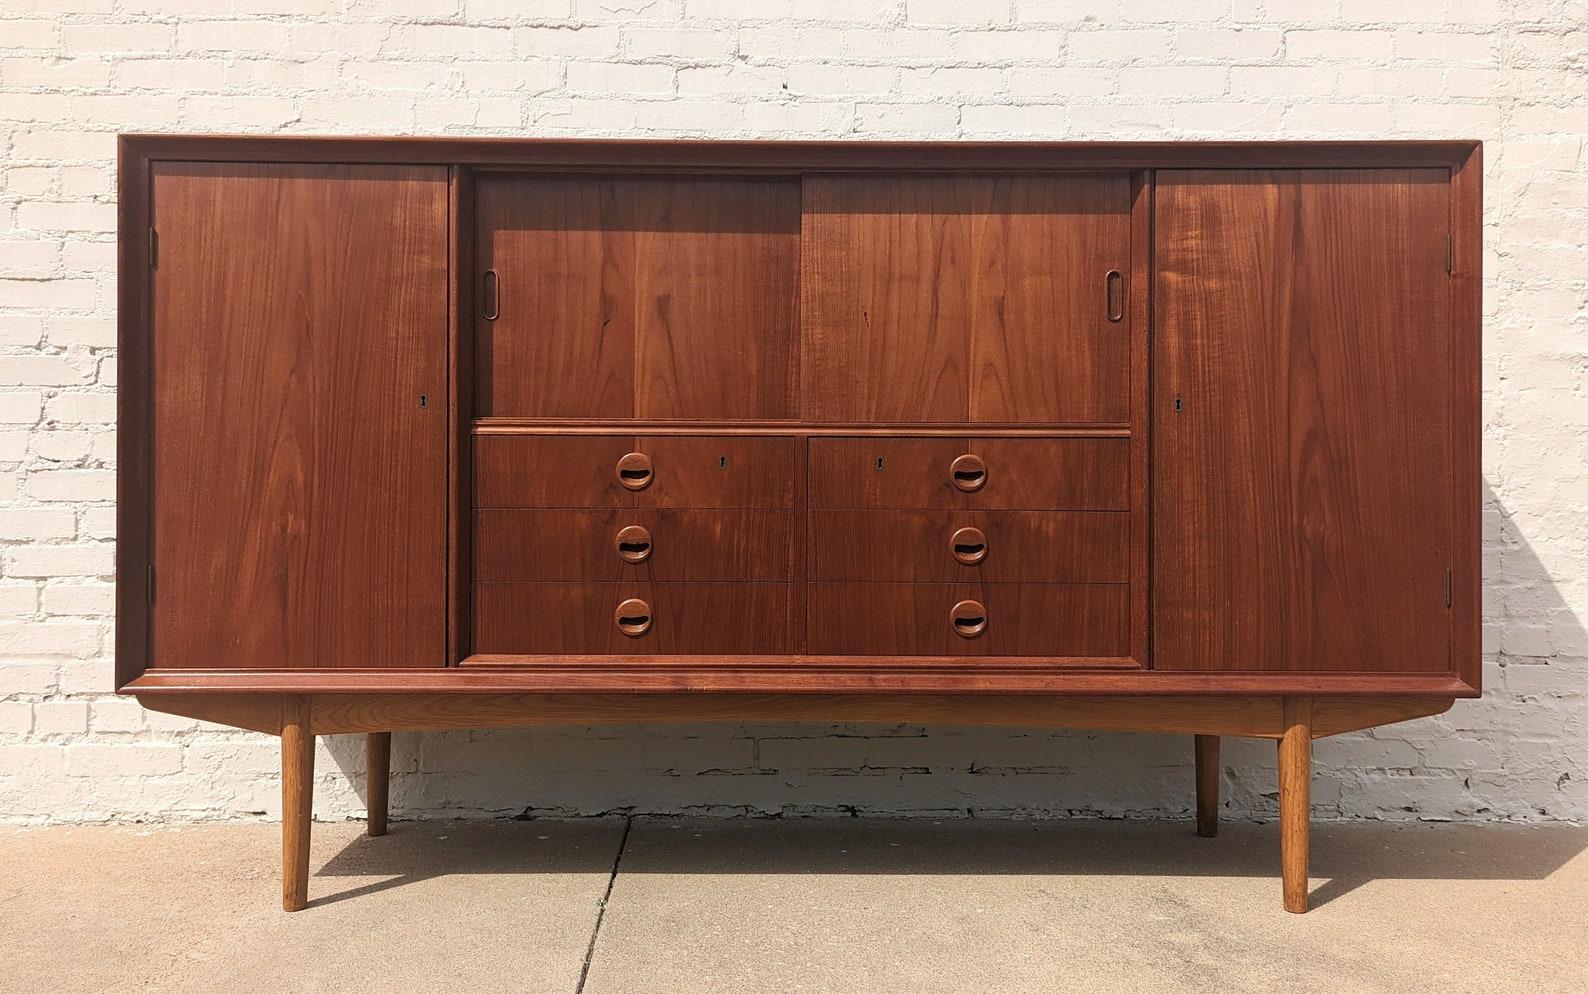 Mid Century Danish Modern Teak Highboard Cabinet

Above average vintage condition and structurally sound. Has some expected slight finish wear and scratching. Beautifully crafted. Outdoor listing pictures might appear slightly darker or more red